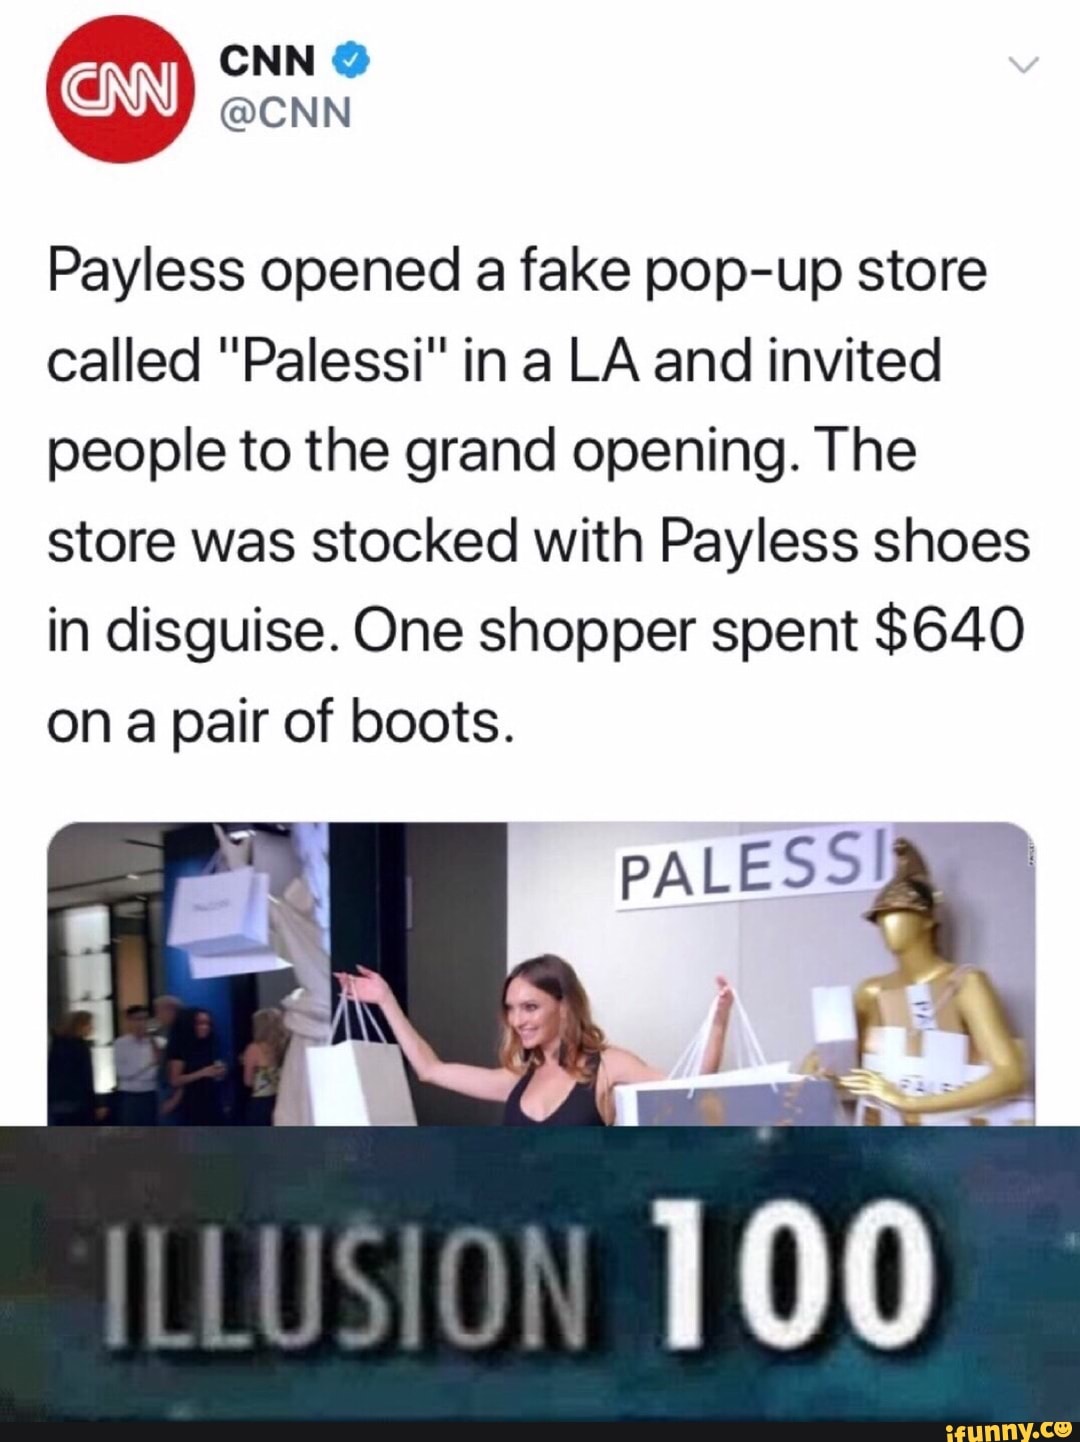 Payless Shoes Reportedly to Close Up To 500 Stores | Moody on the Market